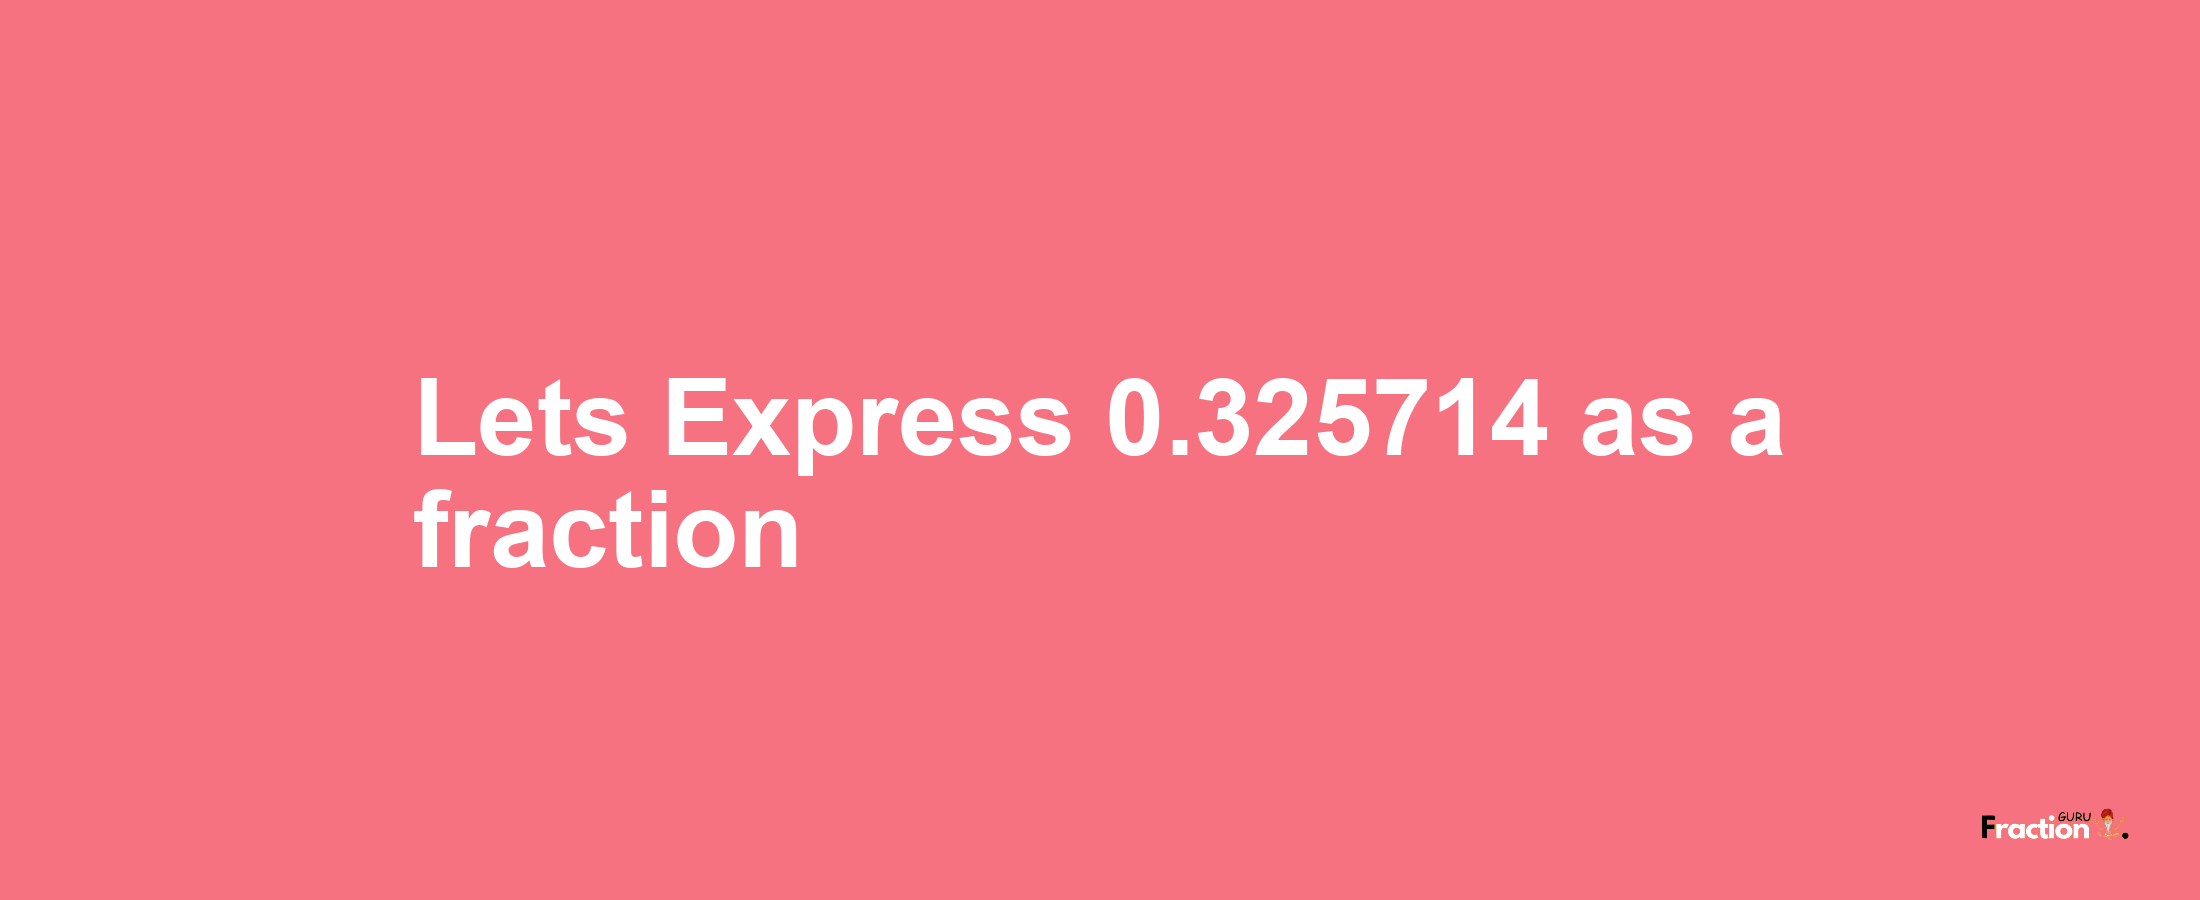 Lets Express 0.325714 as afraction